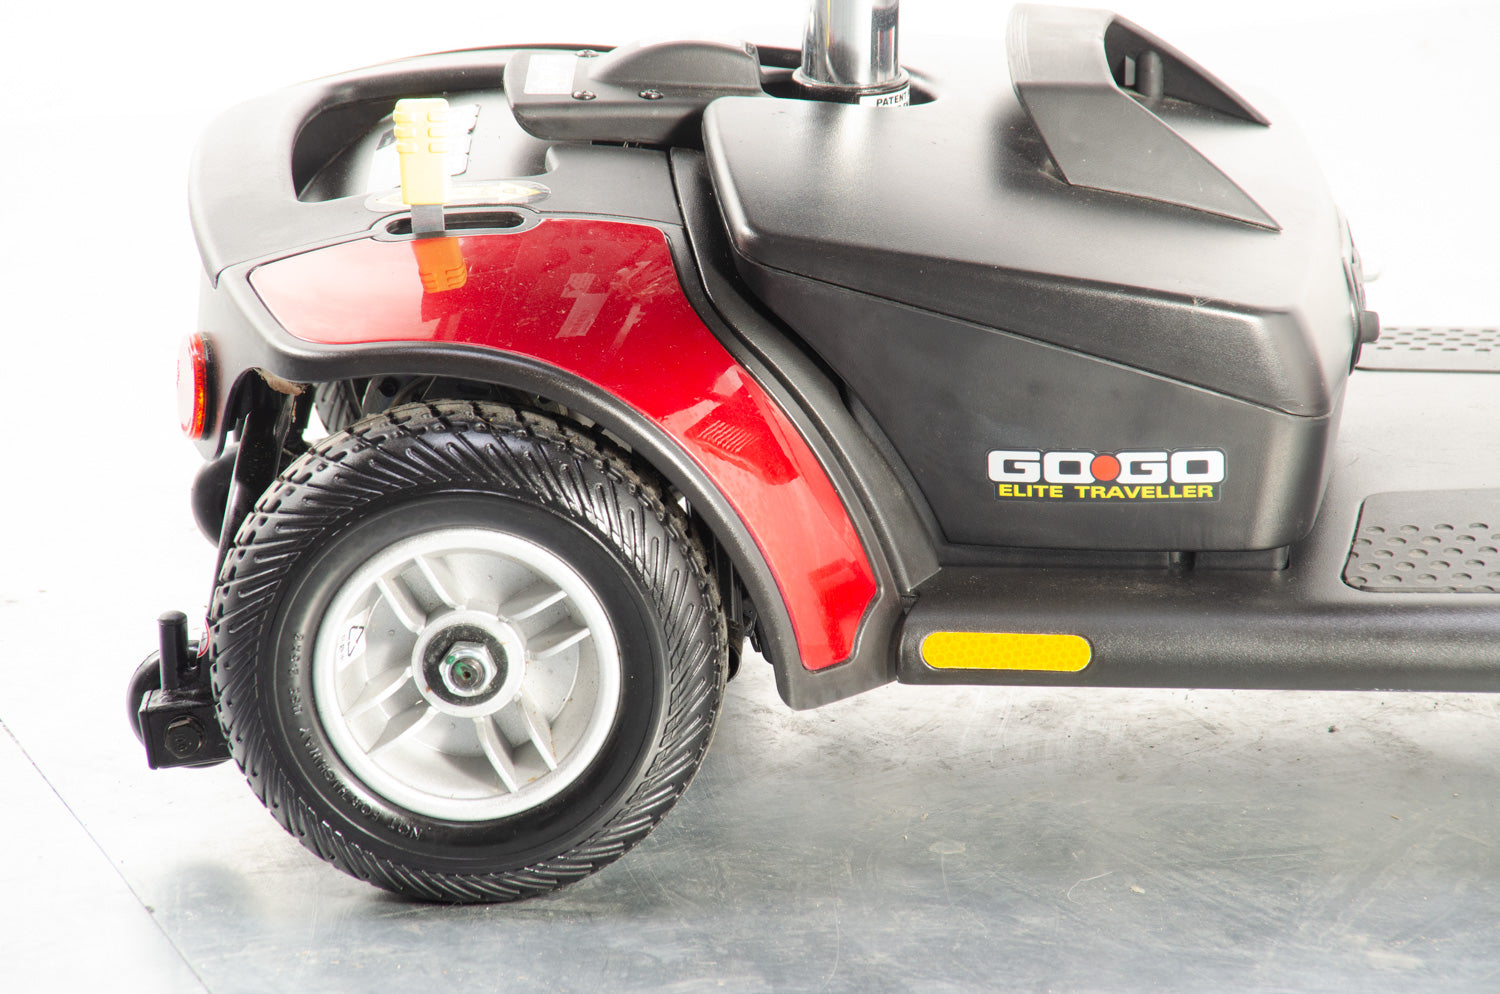 2016 Pride Go-Go Elite Traveller 4mph Transportable Mobility Boot Scooter in Red